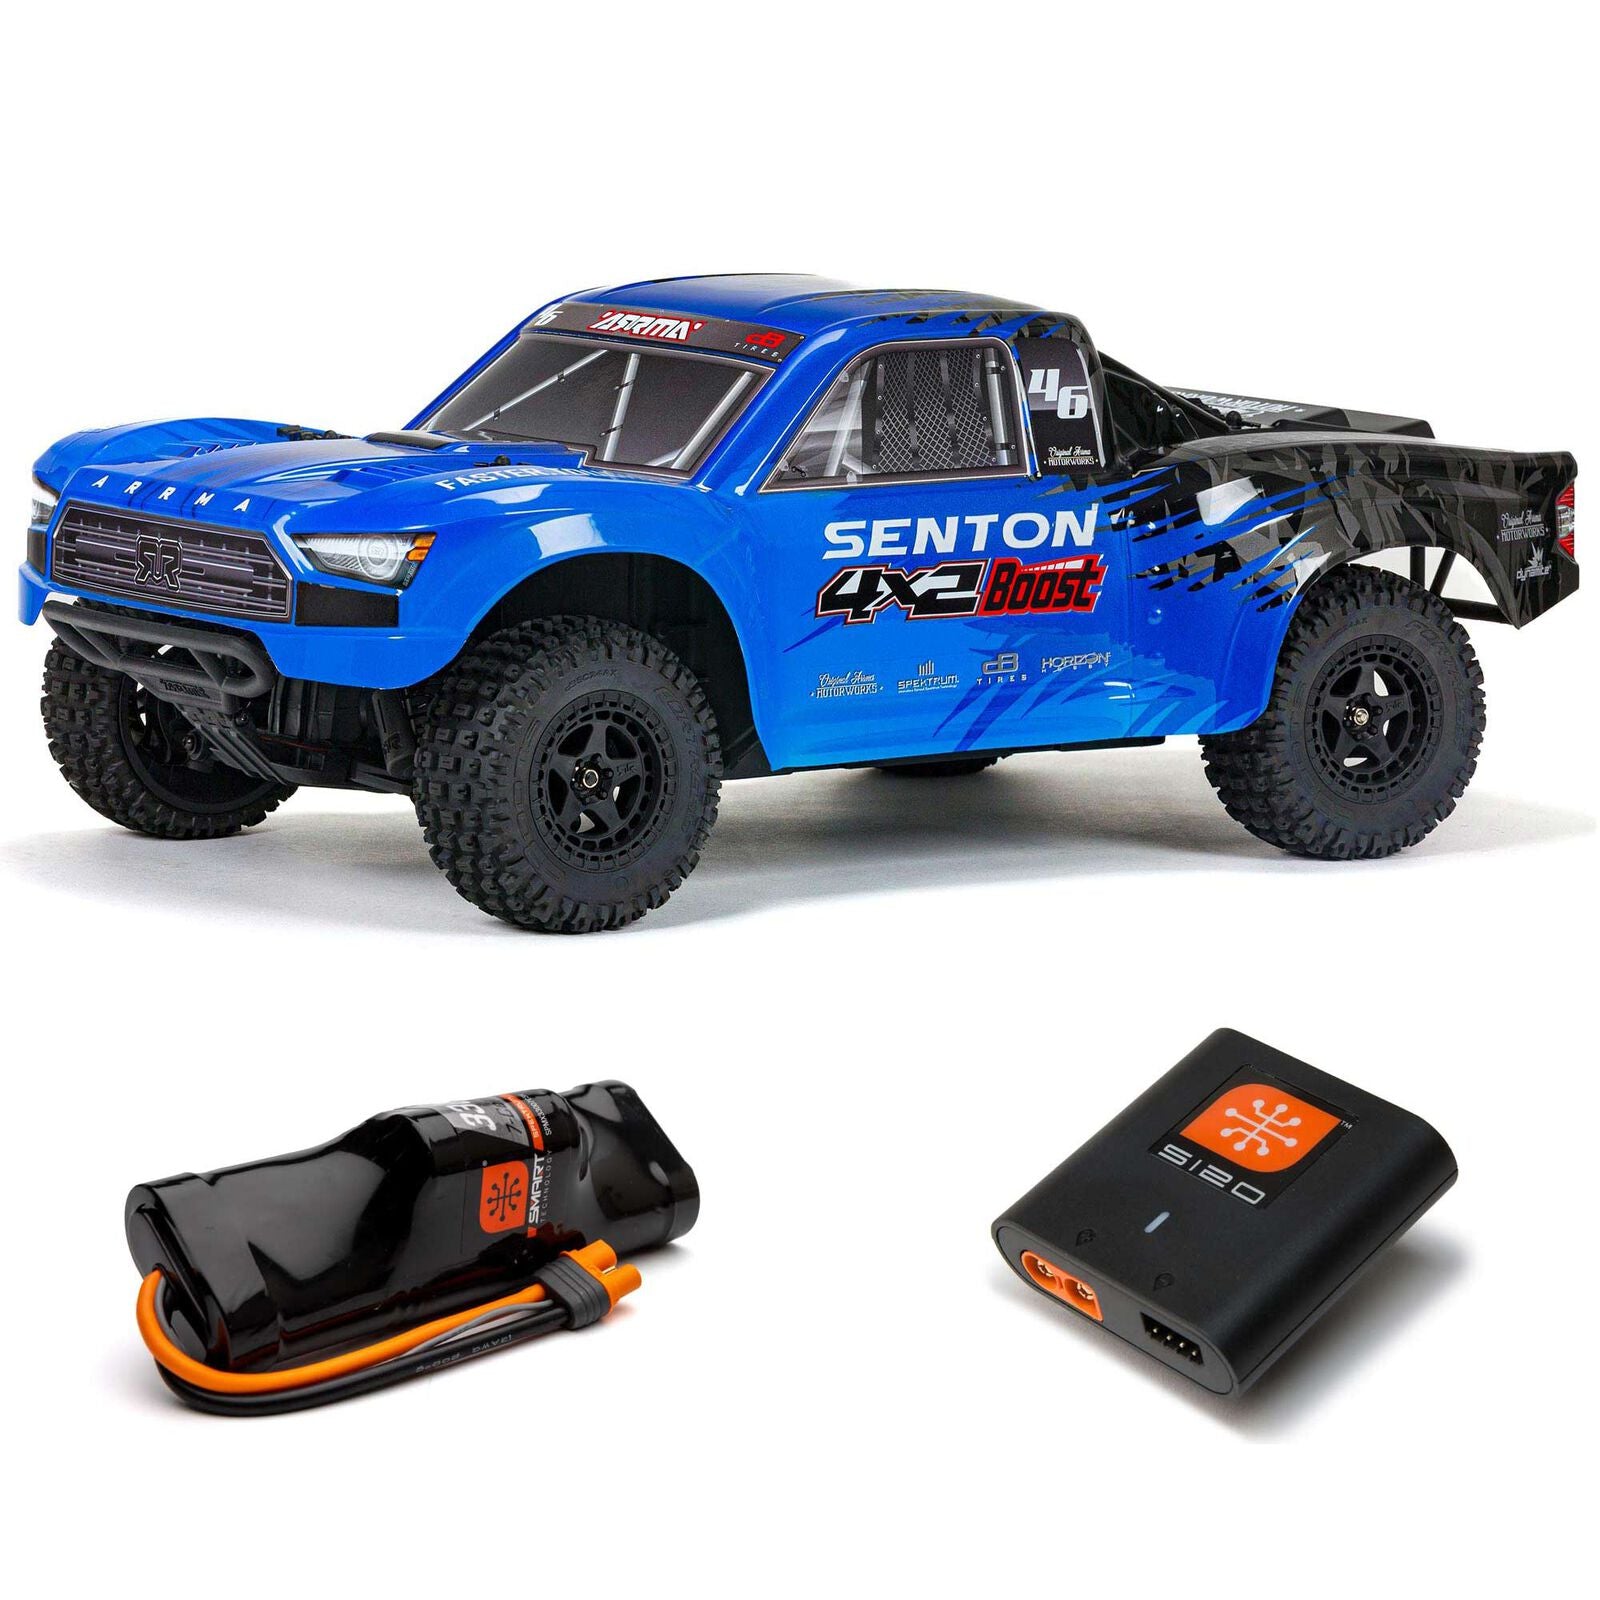 ARRMA ARA4103SV4 1/10 SENTON 4X2 BOOST MEGA 550 Brushed Short Course Truck RTR with Battery & Charger